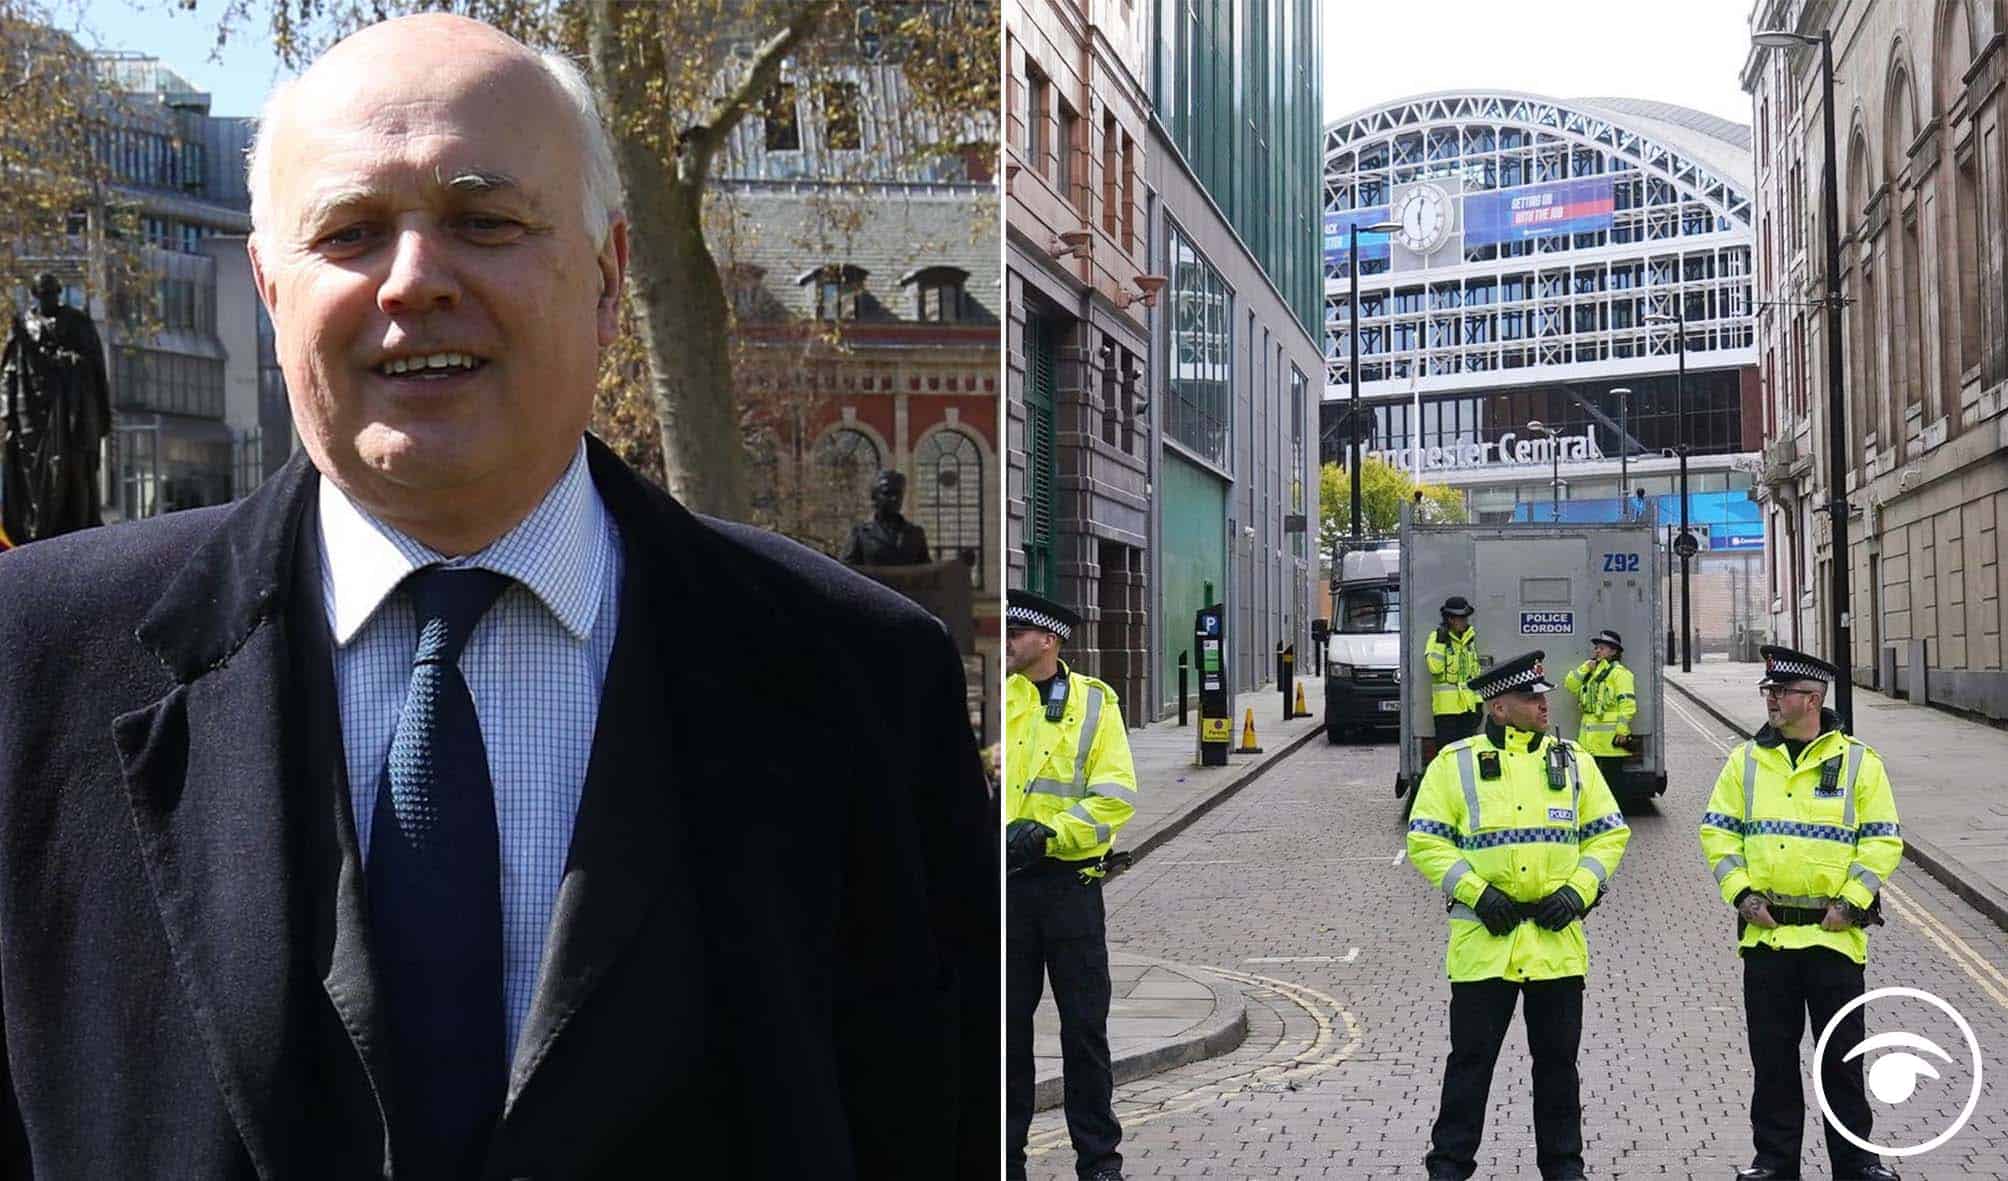 ‘Tory scum:’ Arrests after Sir Iain Duncan Smith allegedly hit with traffic cone